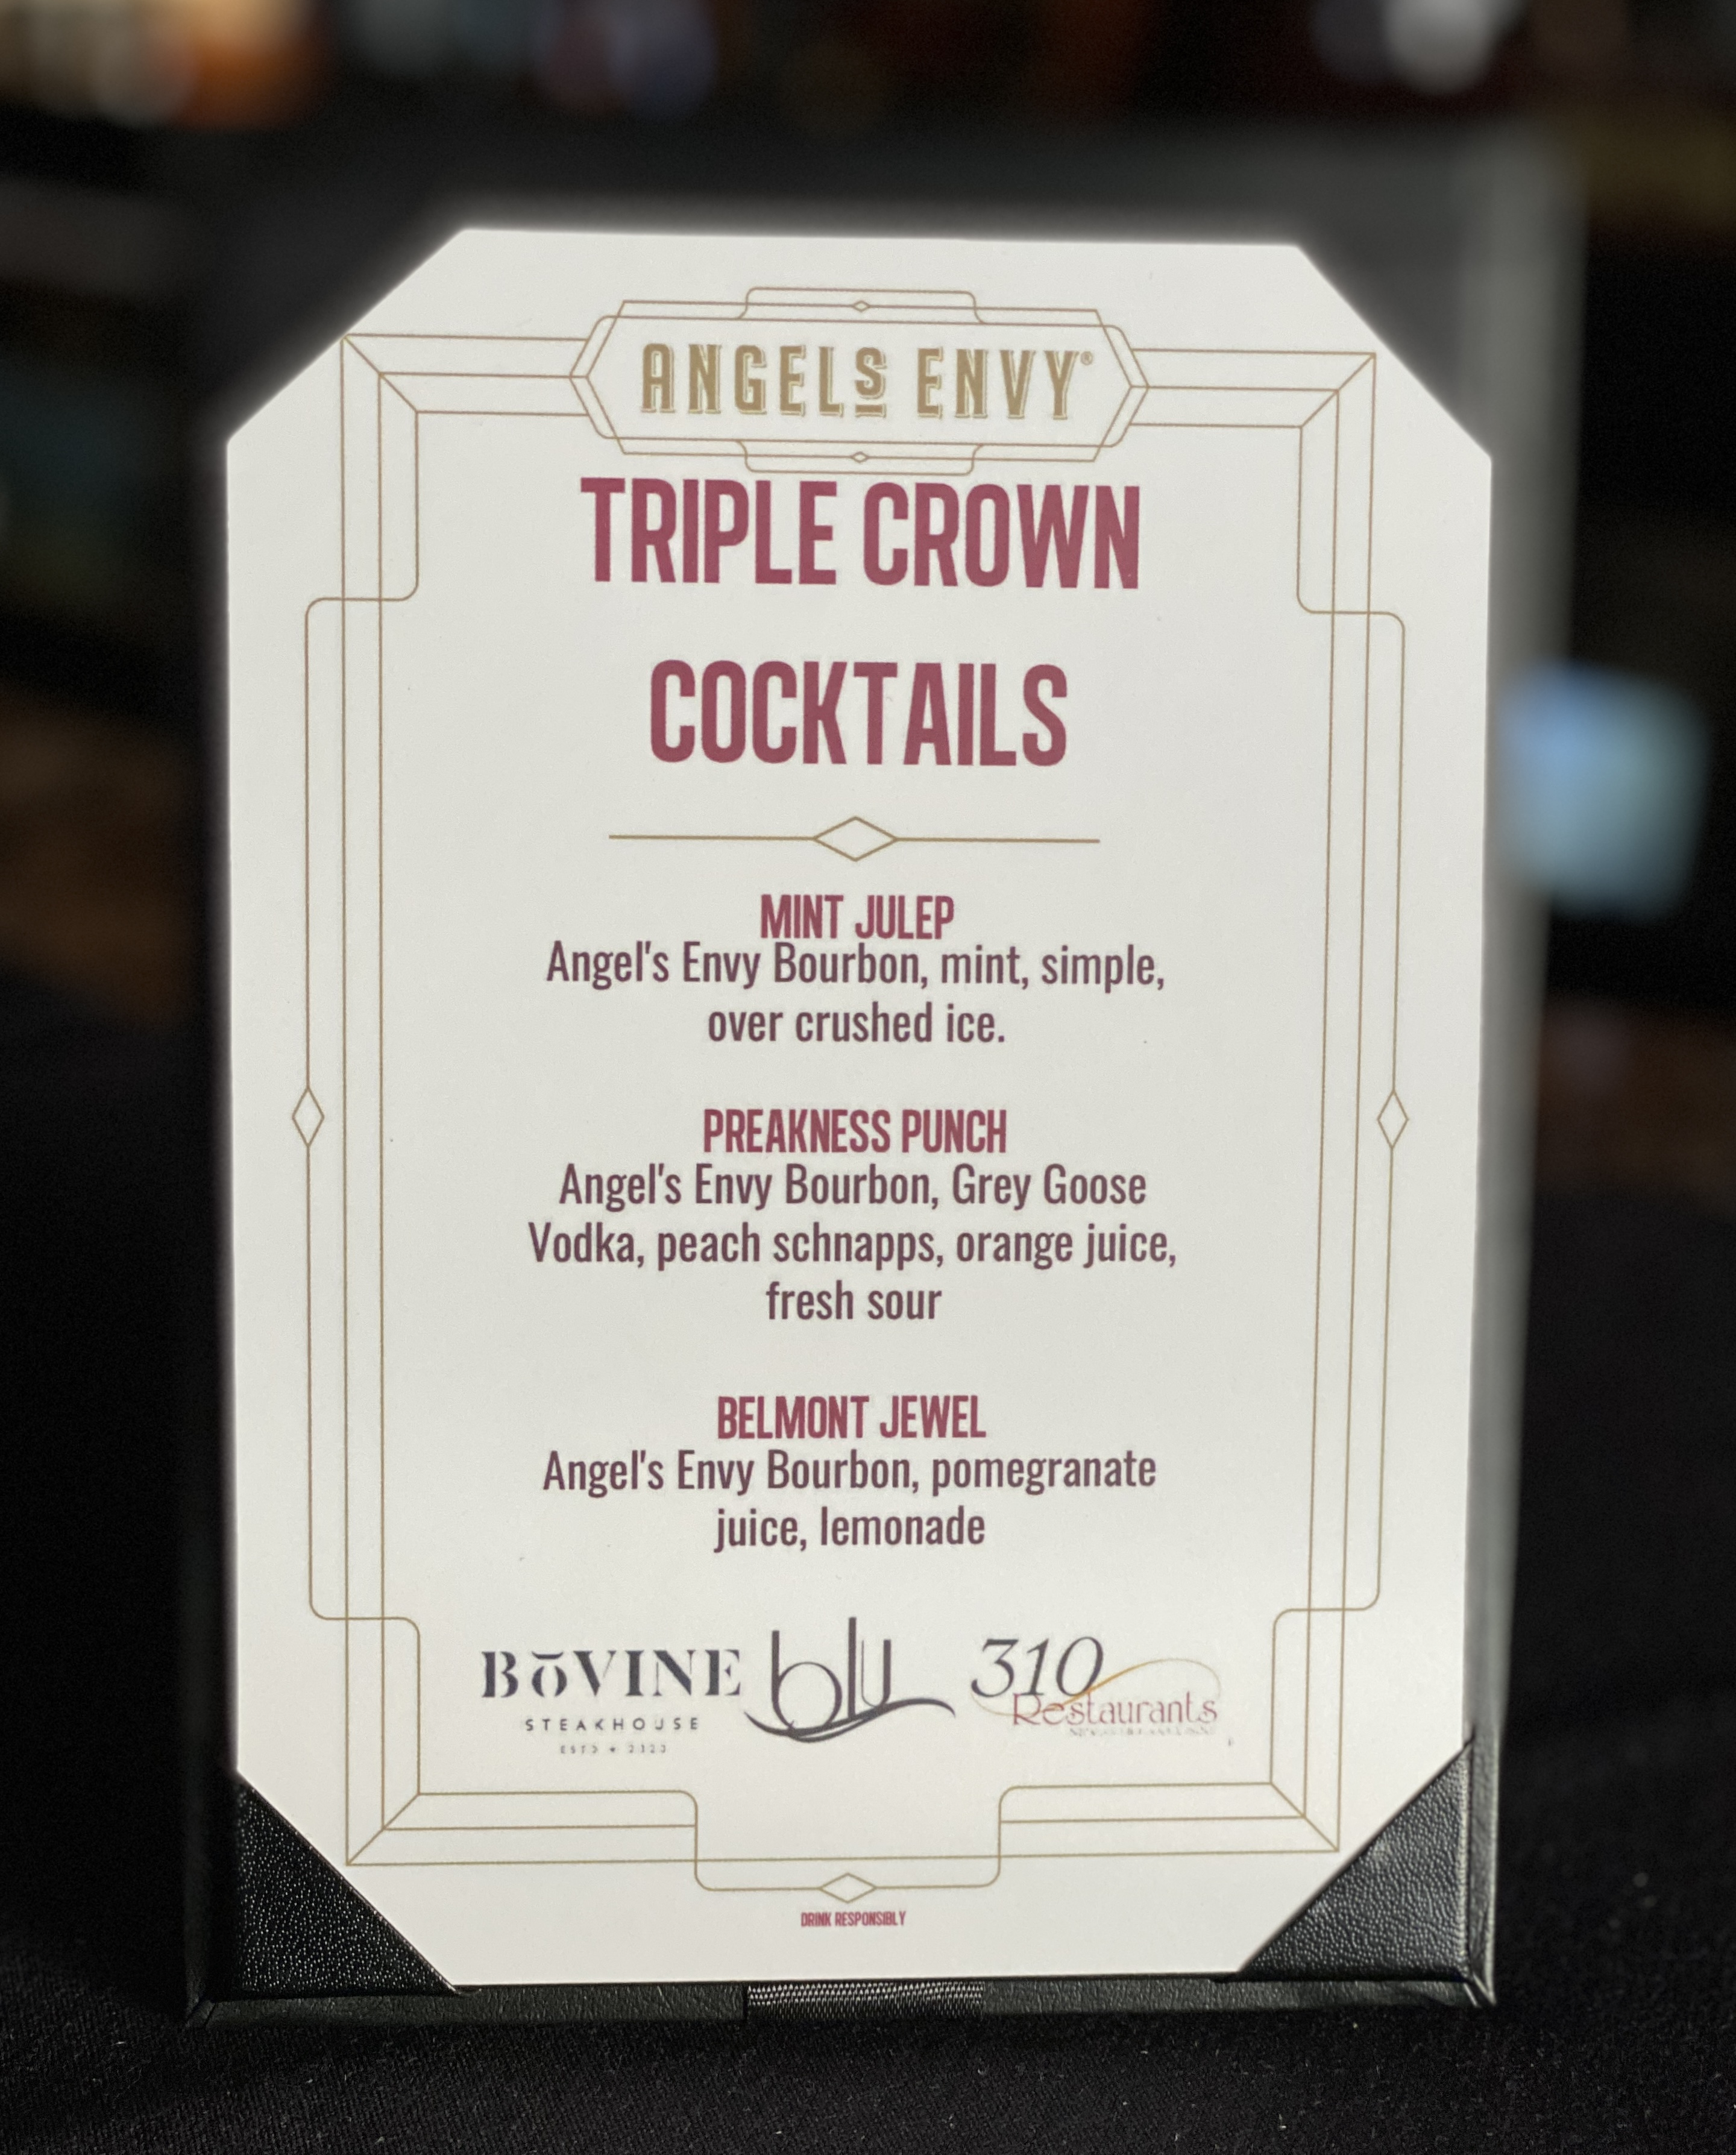 A cocktail featured drink flyer promoting Angels Envy bourbon and a few specialty drinks.